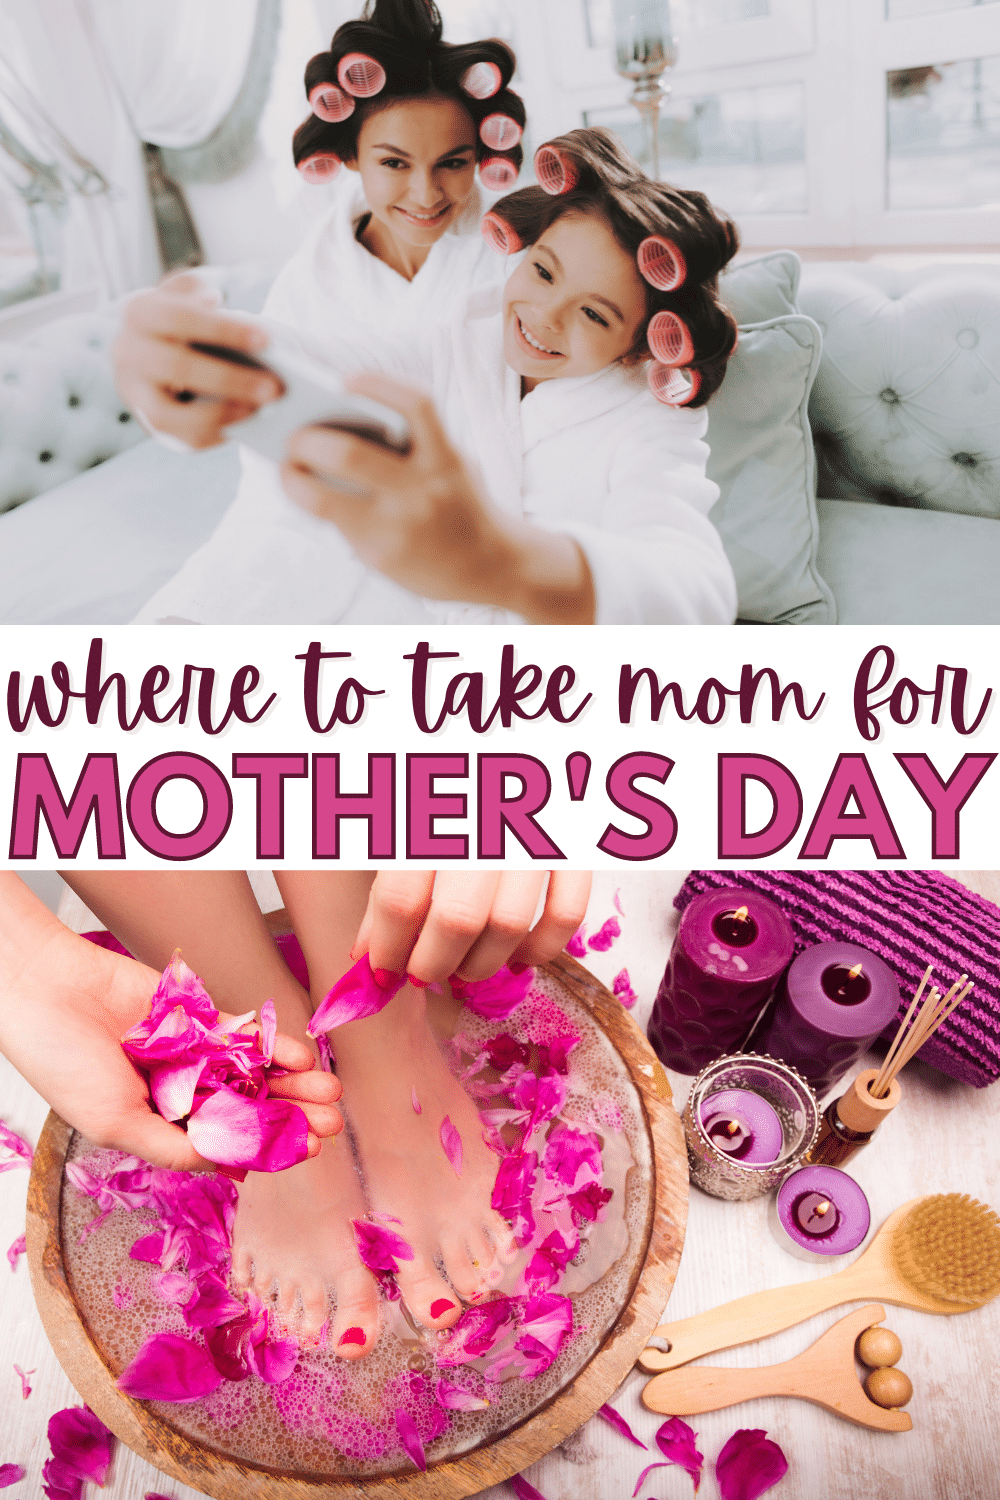 Mom spends a lot of time working on the house. Give her a break on Mother's Day and take her out. Here are some ideas of where to take mom for Mother's Day. #mothersday #formom #mothersdaygifts #forher via @wondermomwannab